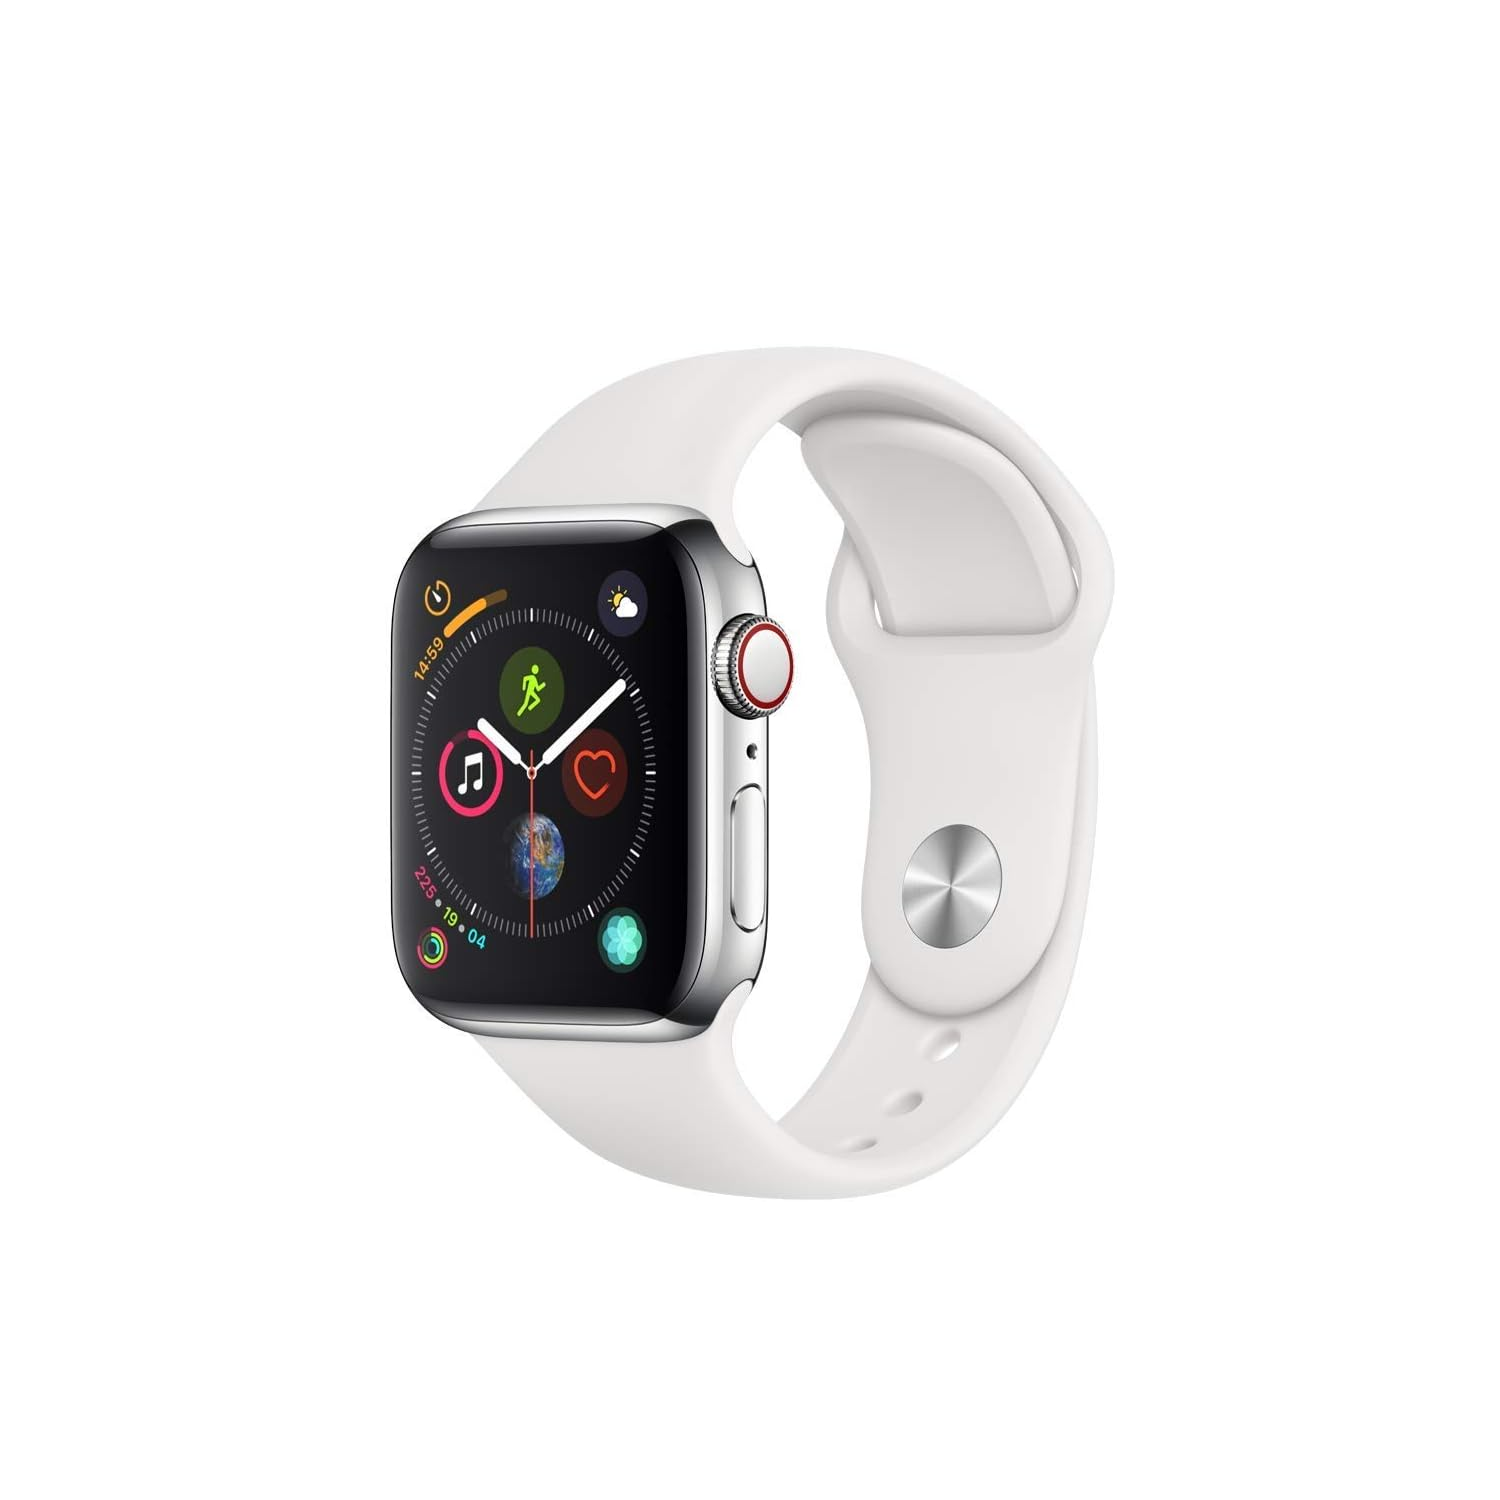 Apple Watch Series 4 Cellular 40mm Stainless Steel Case with Sport Band